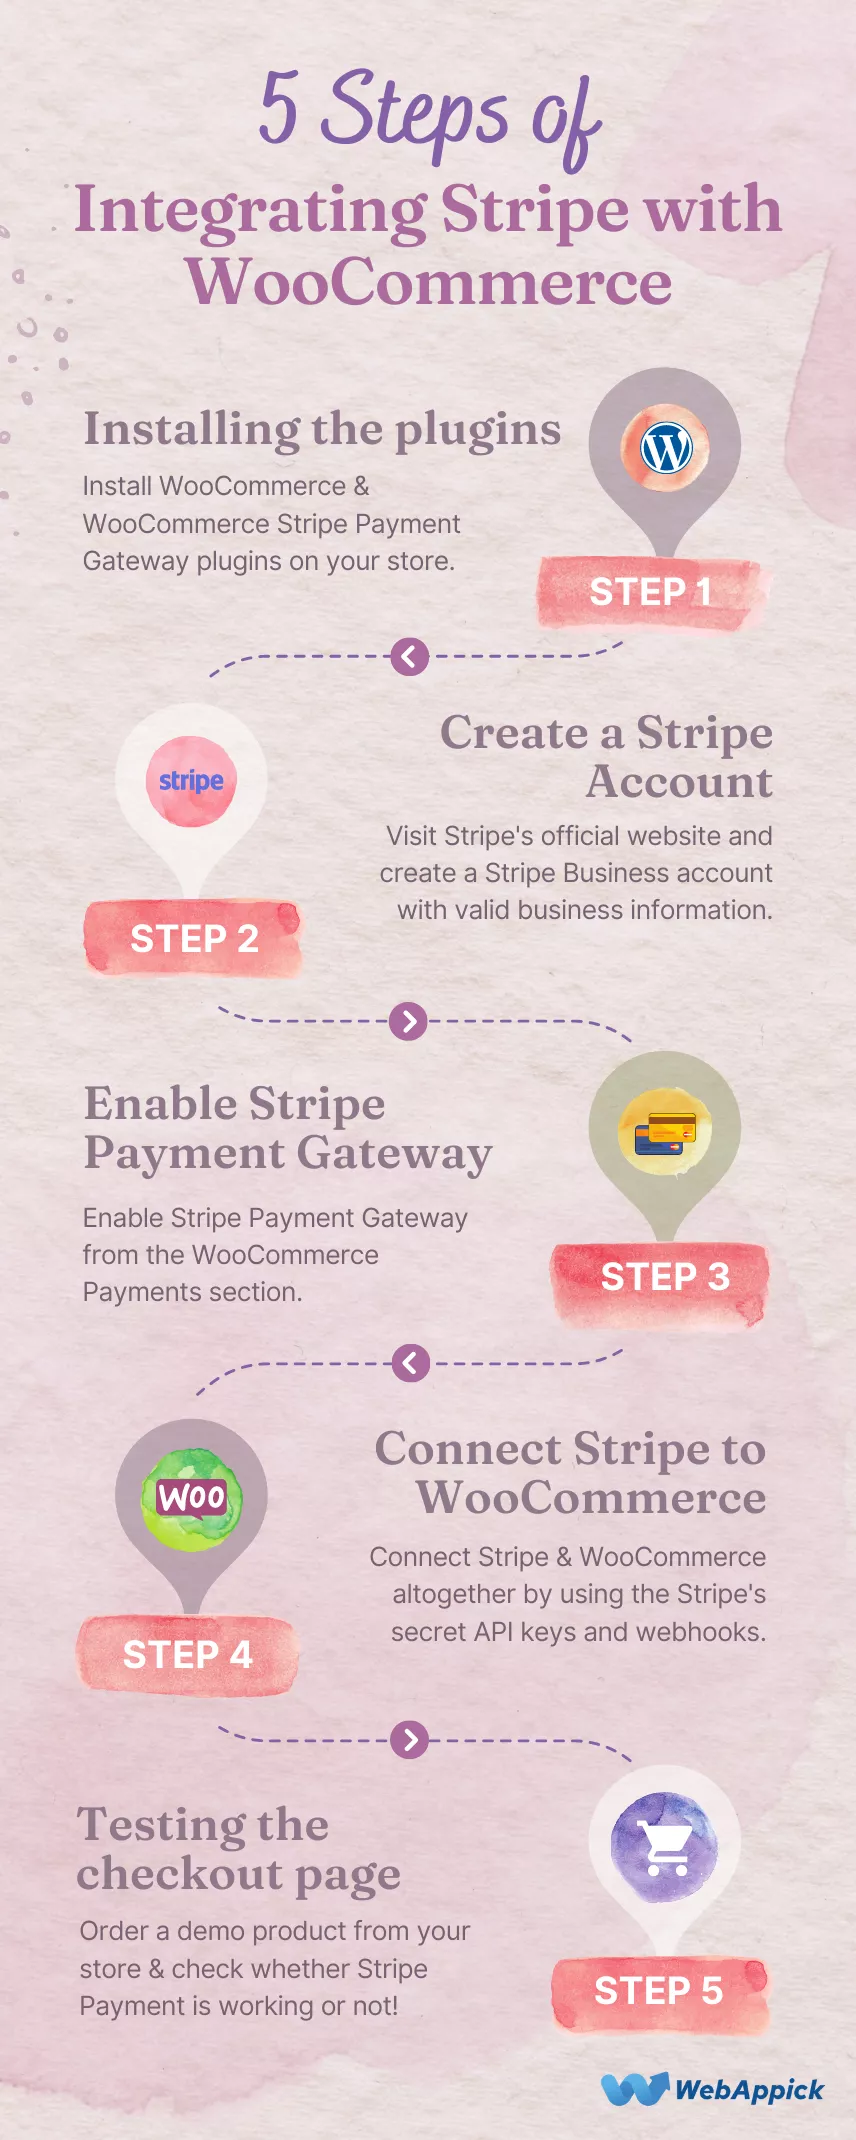 Integrating Stripe with WooCommerce